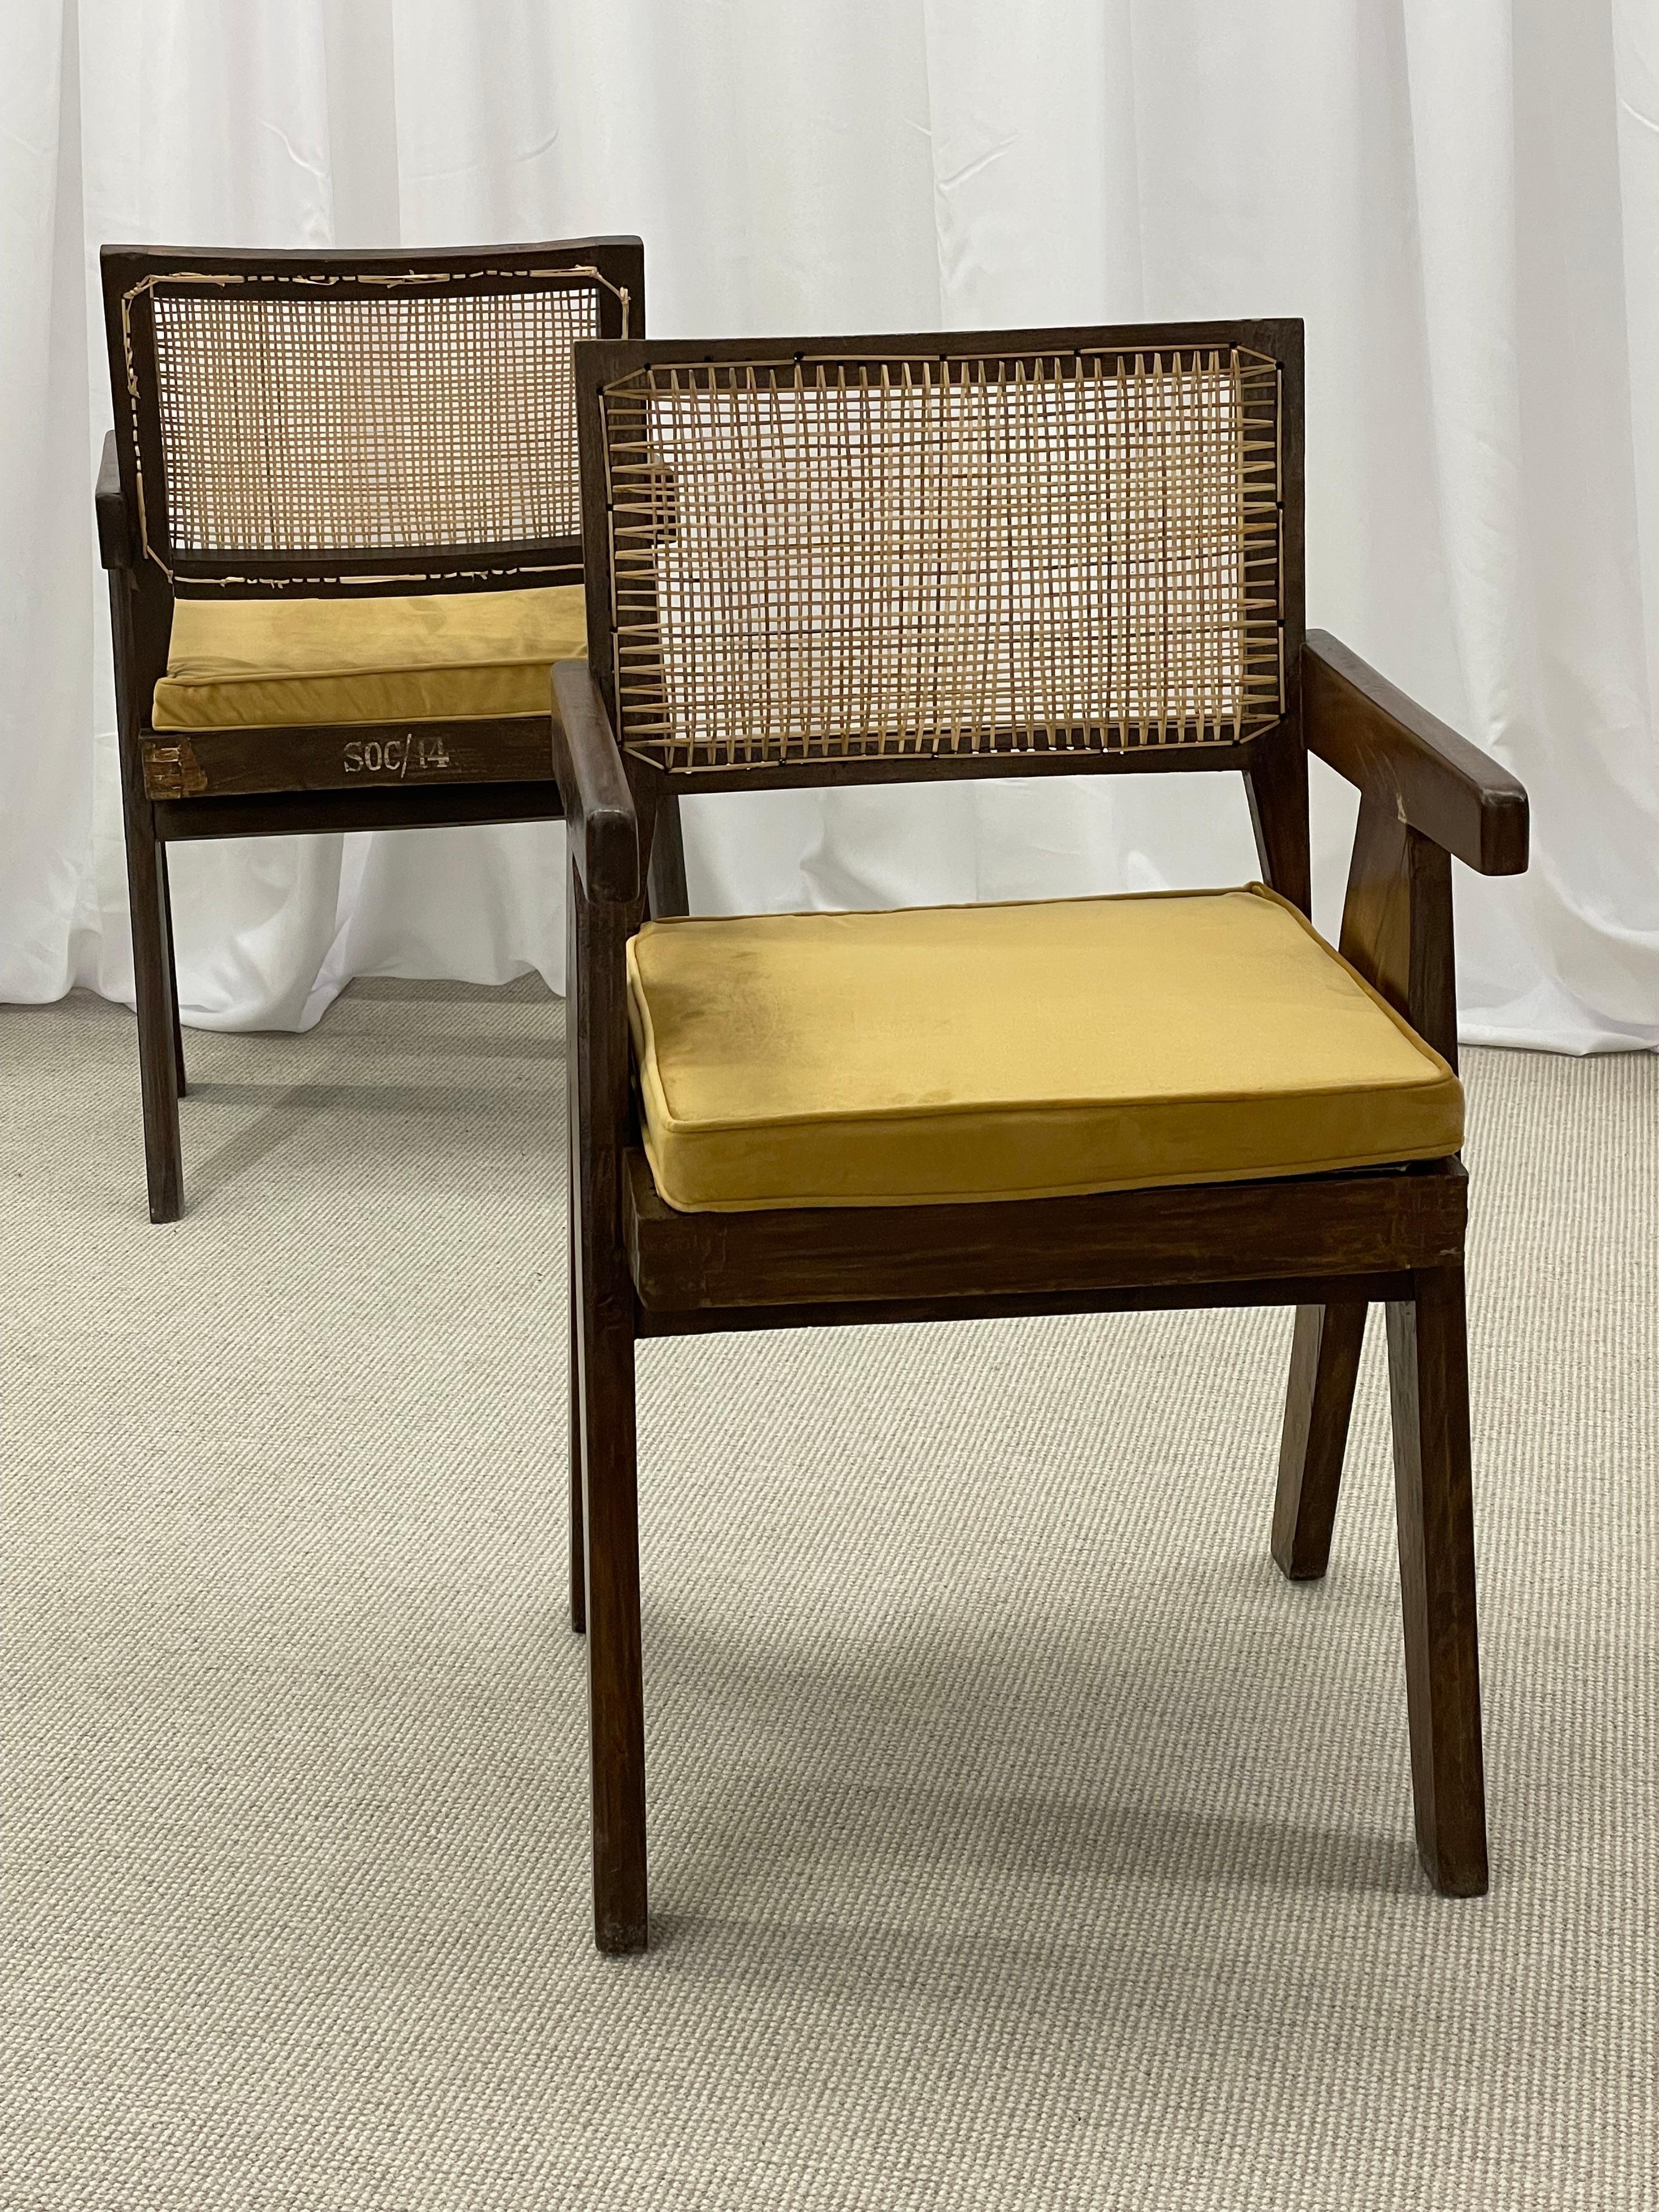 20th Century Pair of Mid-Century Modern Pierre Jeanneret Office Chairs, Authentic